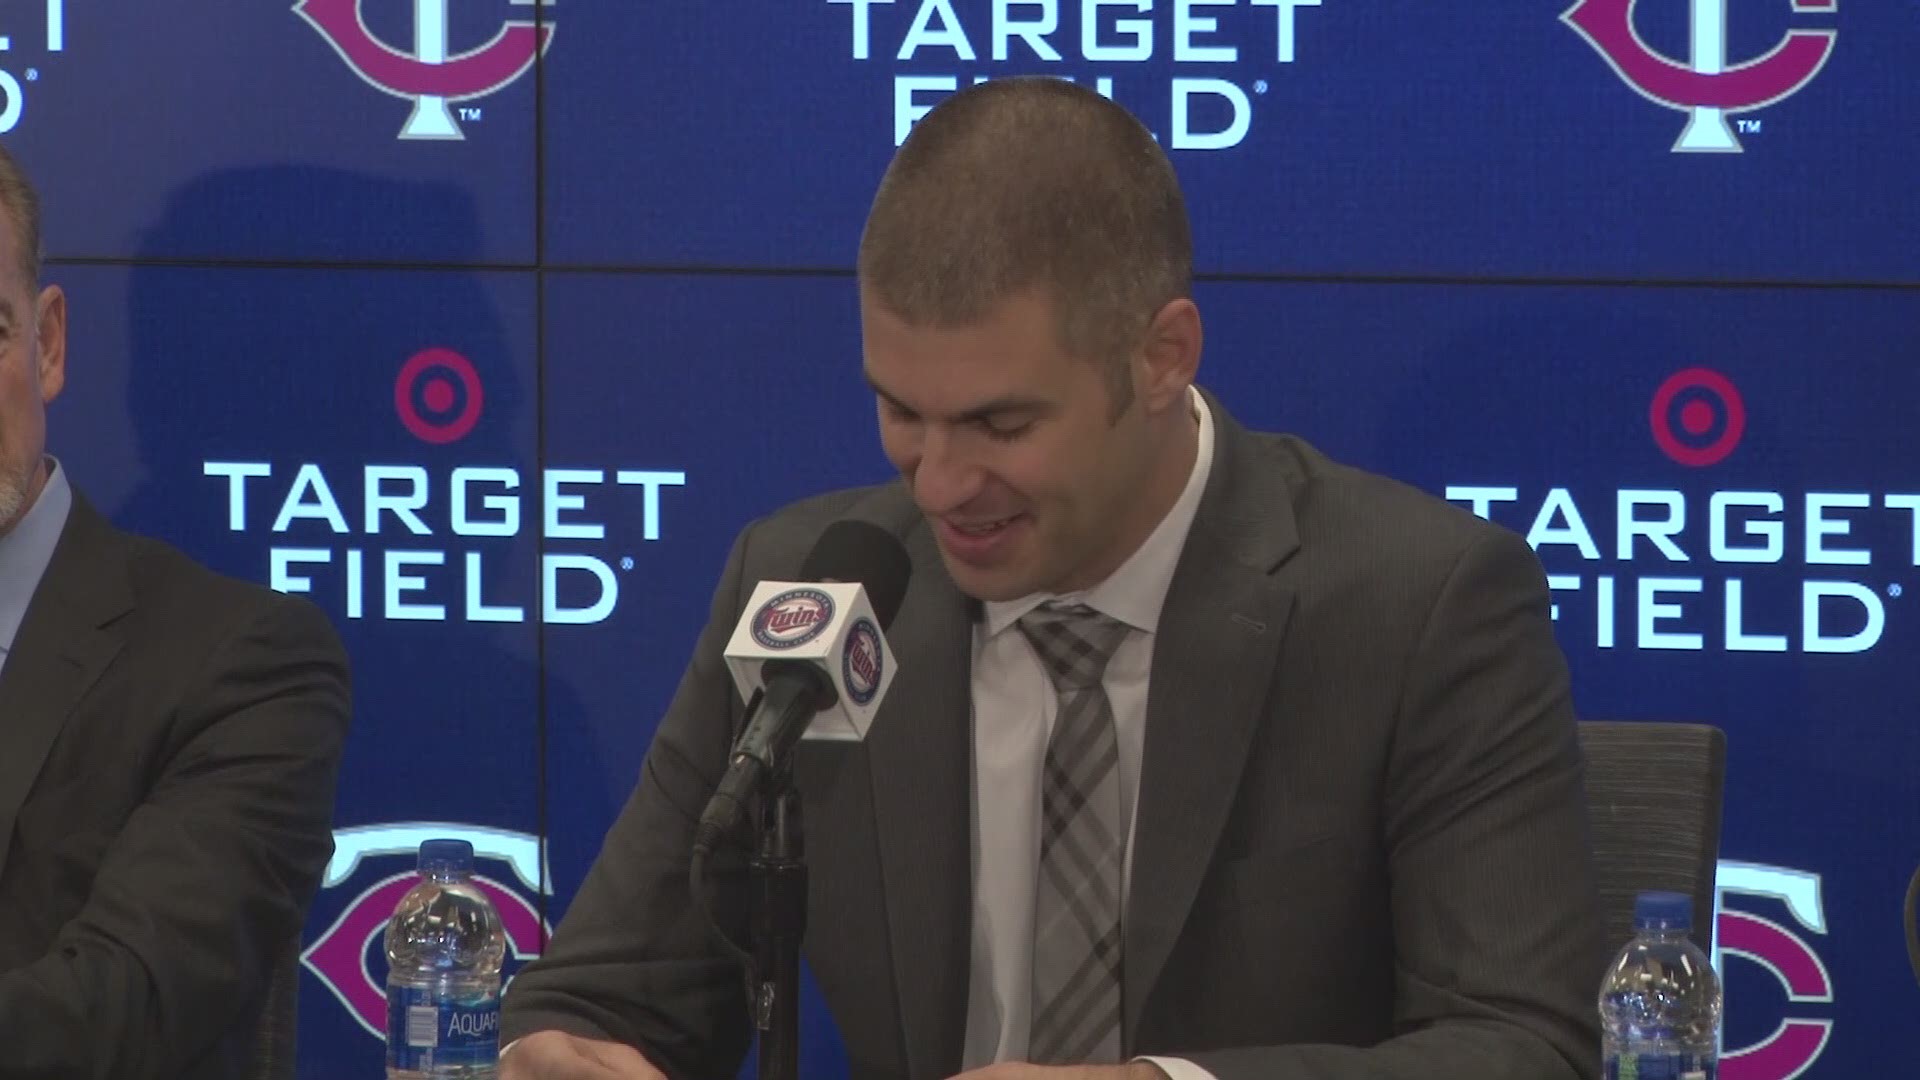 Retiring Twins legend Joe Mauer spent plenty of Monday's presser thanking his coaches and teammates for their contributions to his career.